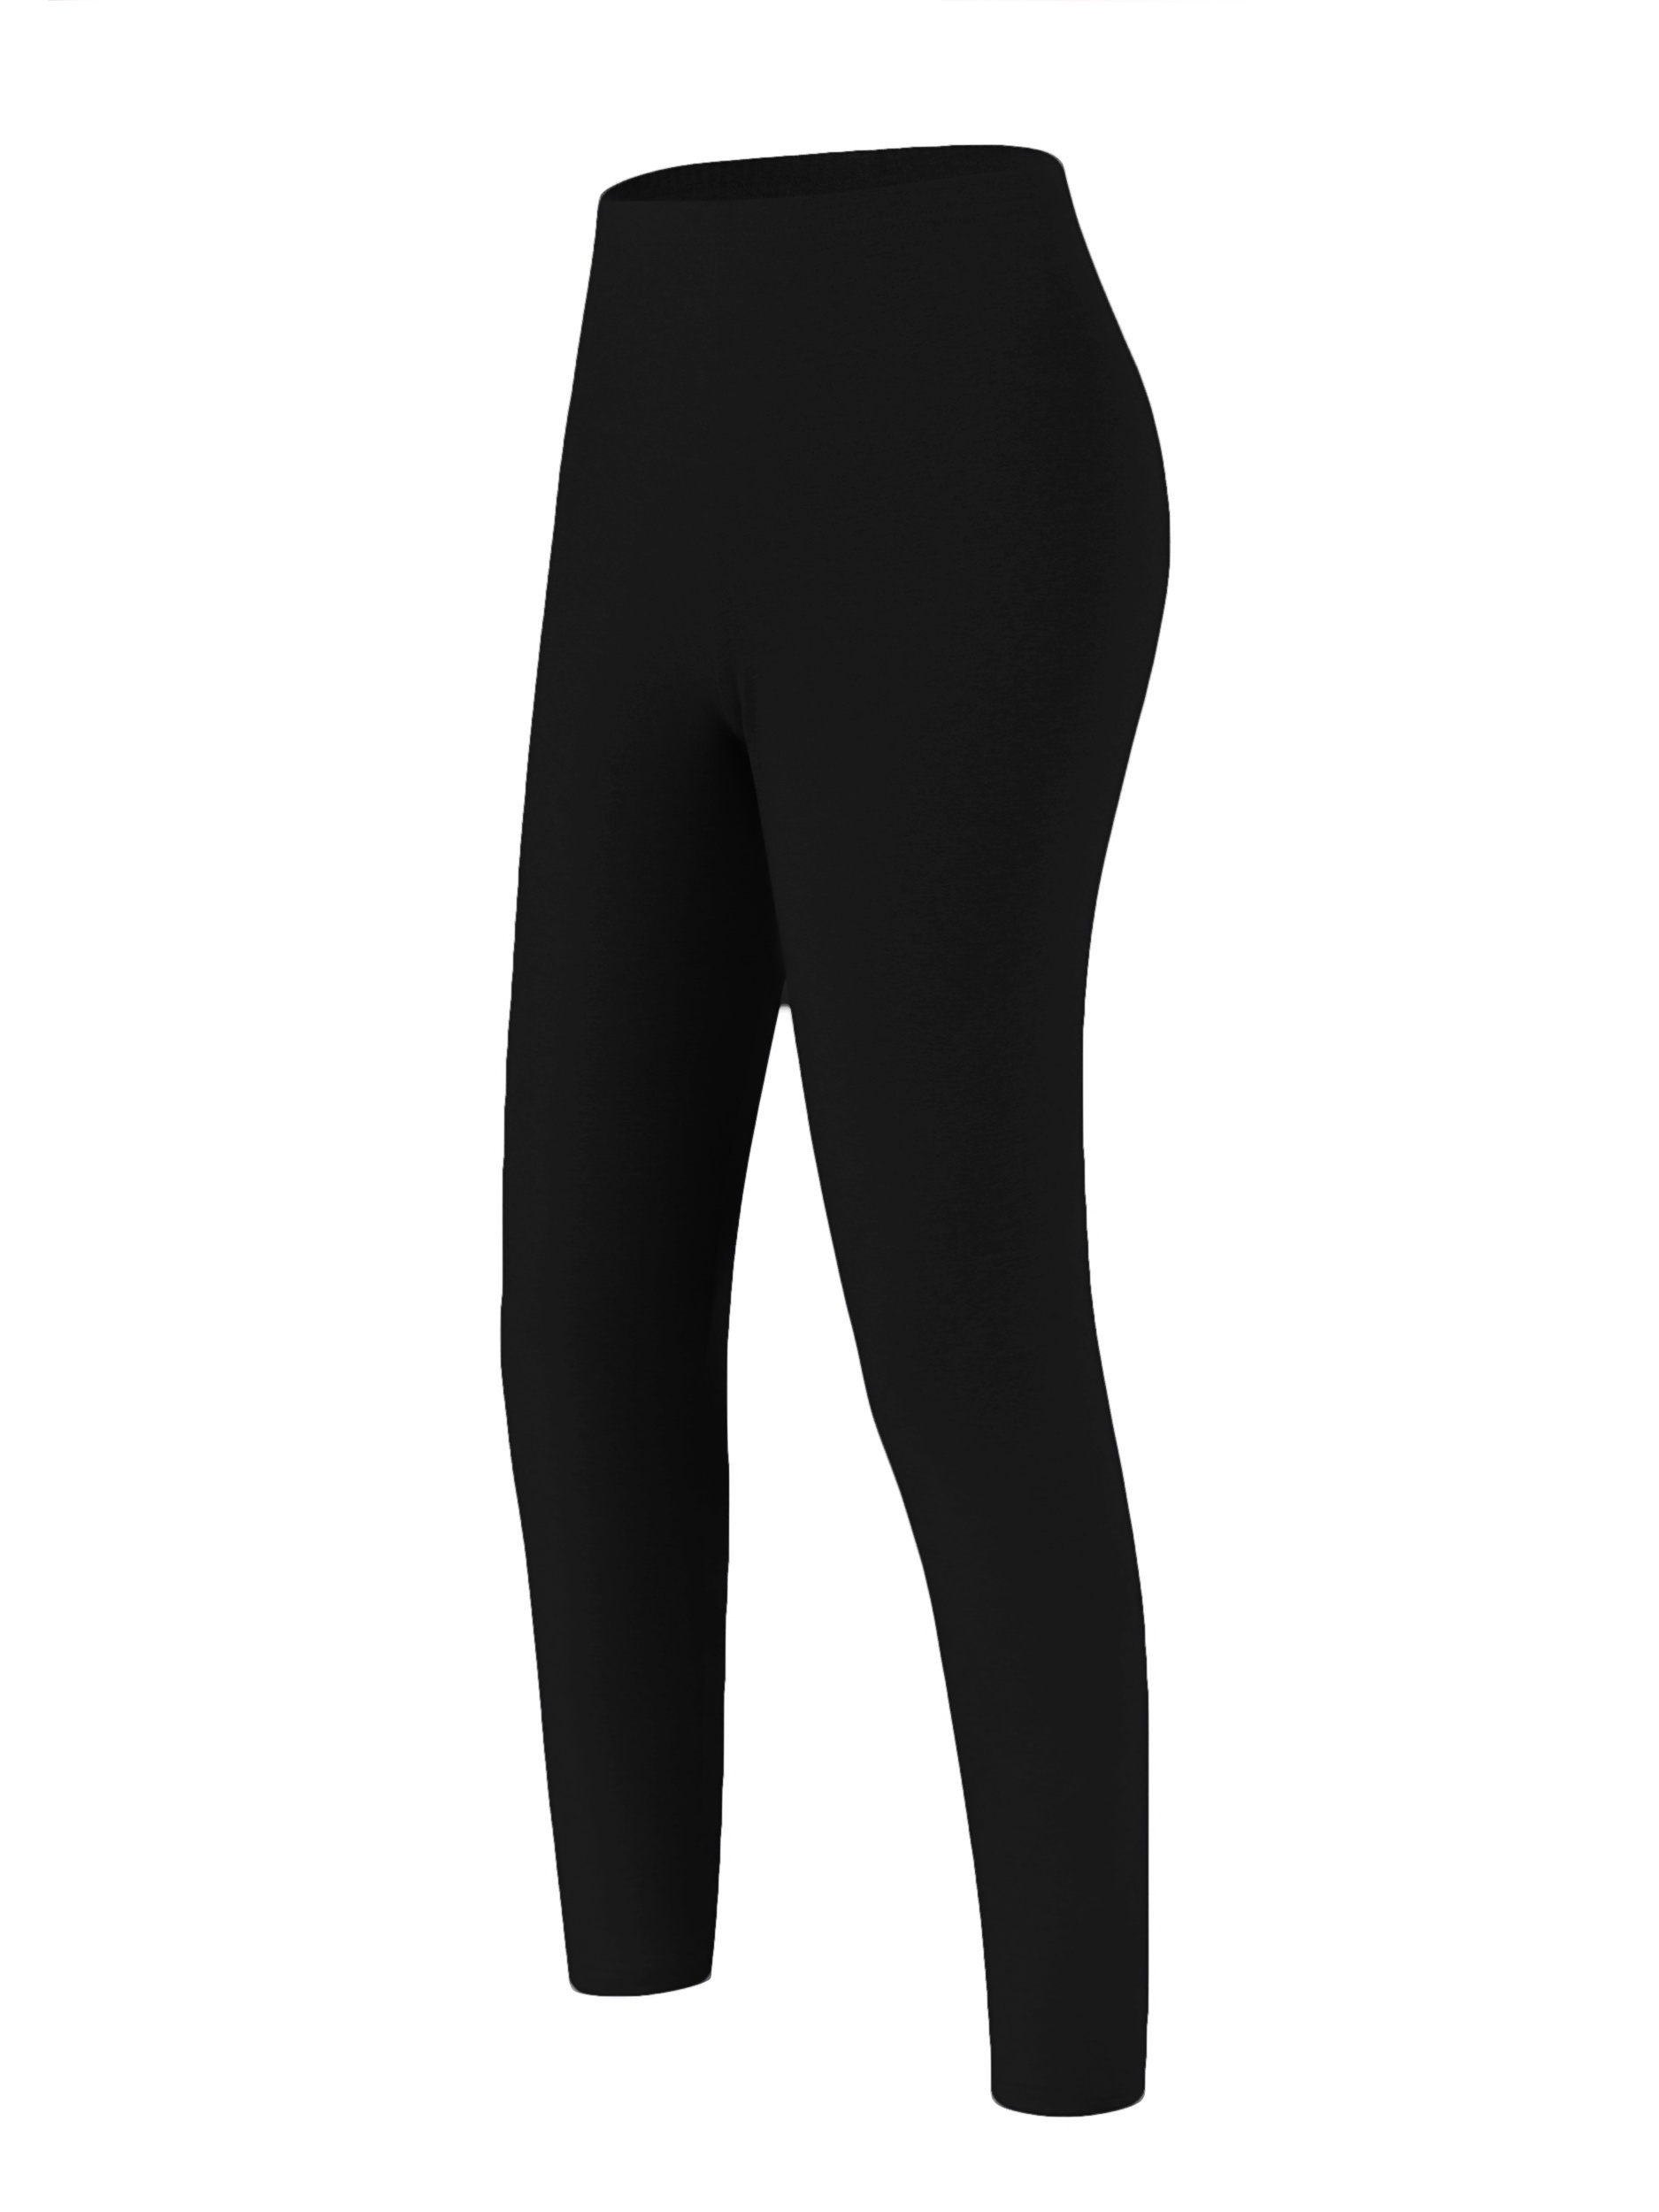 Women's High Stretch Yoga Leggings: Slim Fit, Waist-Hugging Workout Gear  for Active Lifestyles